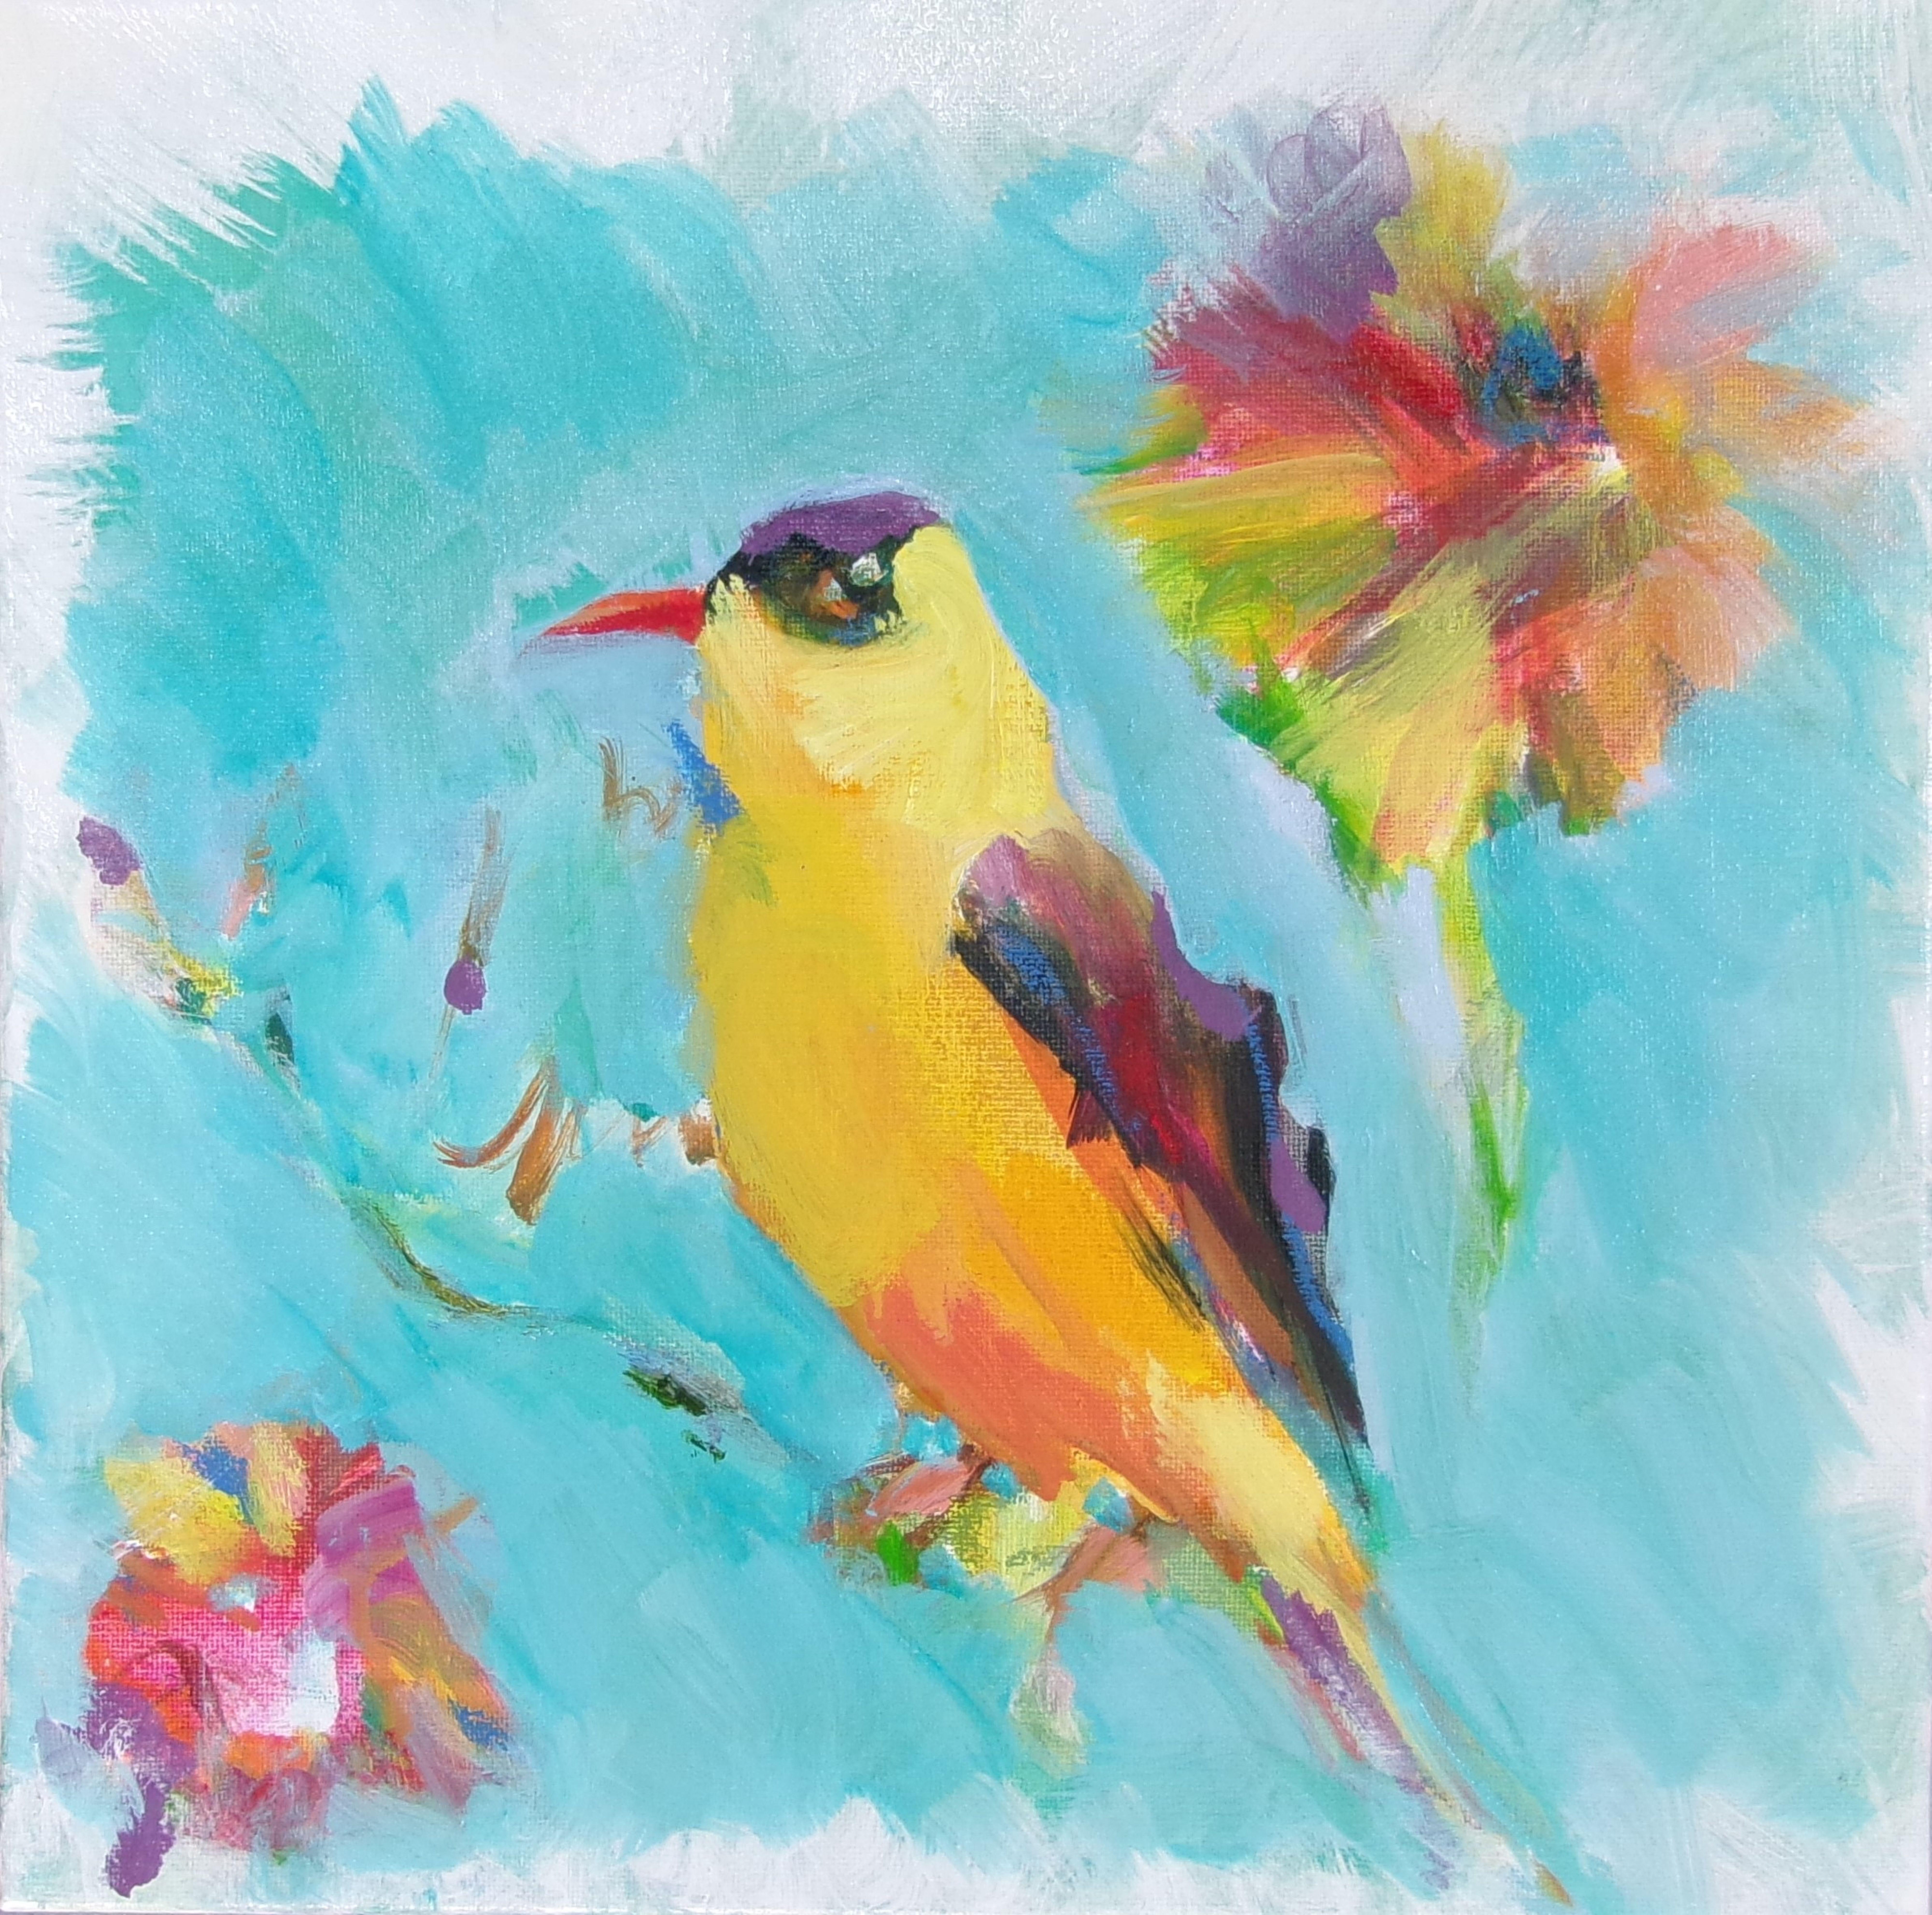 this bird can be purchased framed or unframed both are shown... obviously framed adds 150. more than featured price...This is part of my bird series for national juried shows :: Painting :: Contemporary :: This piece comes with an official